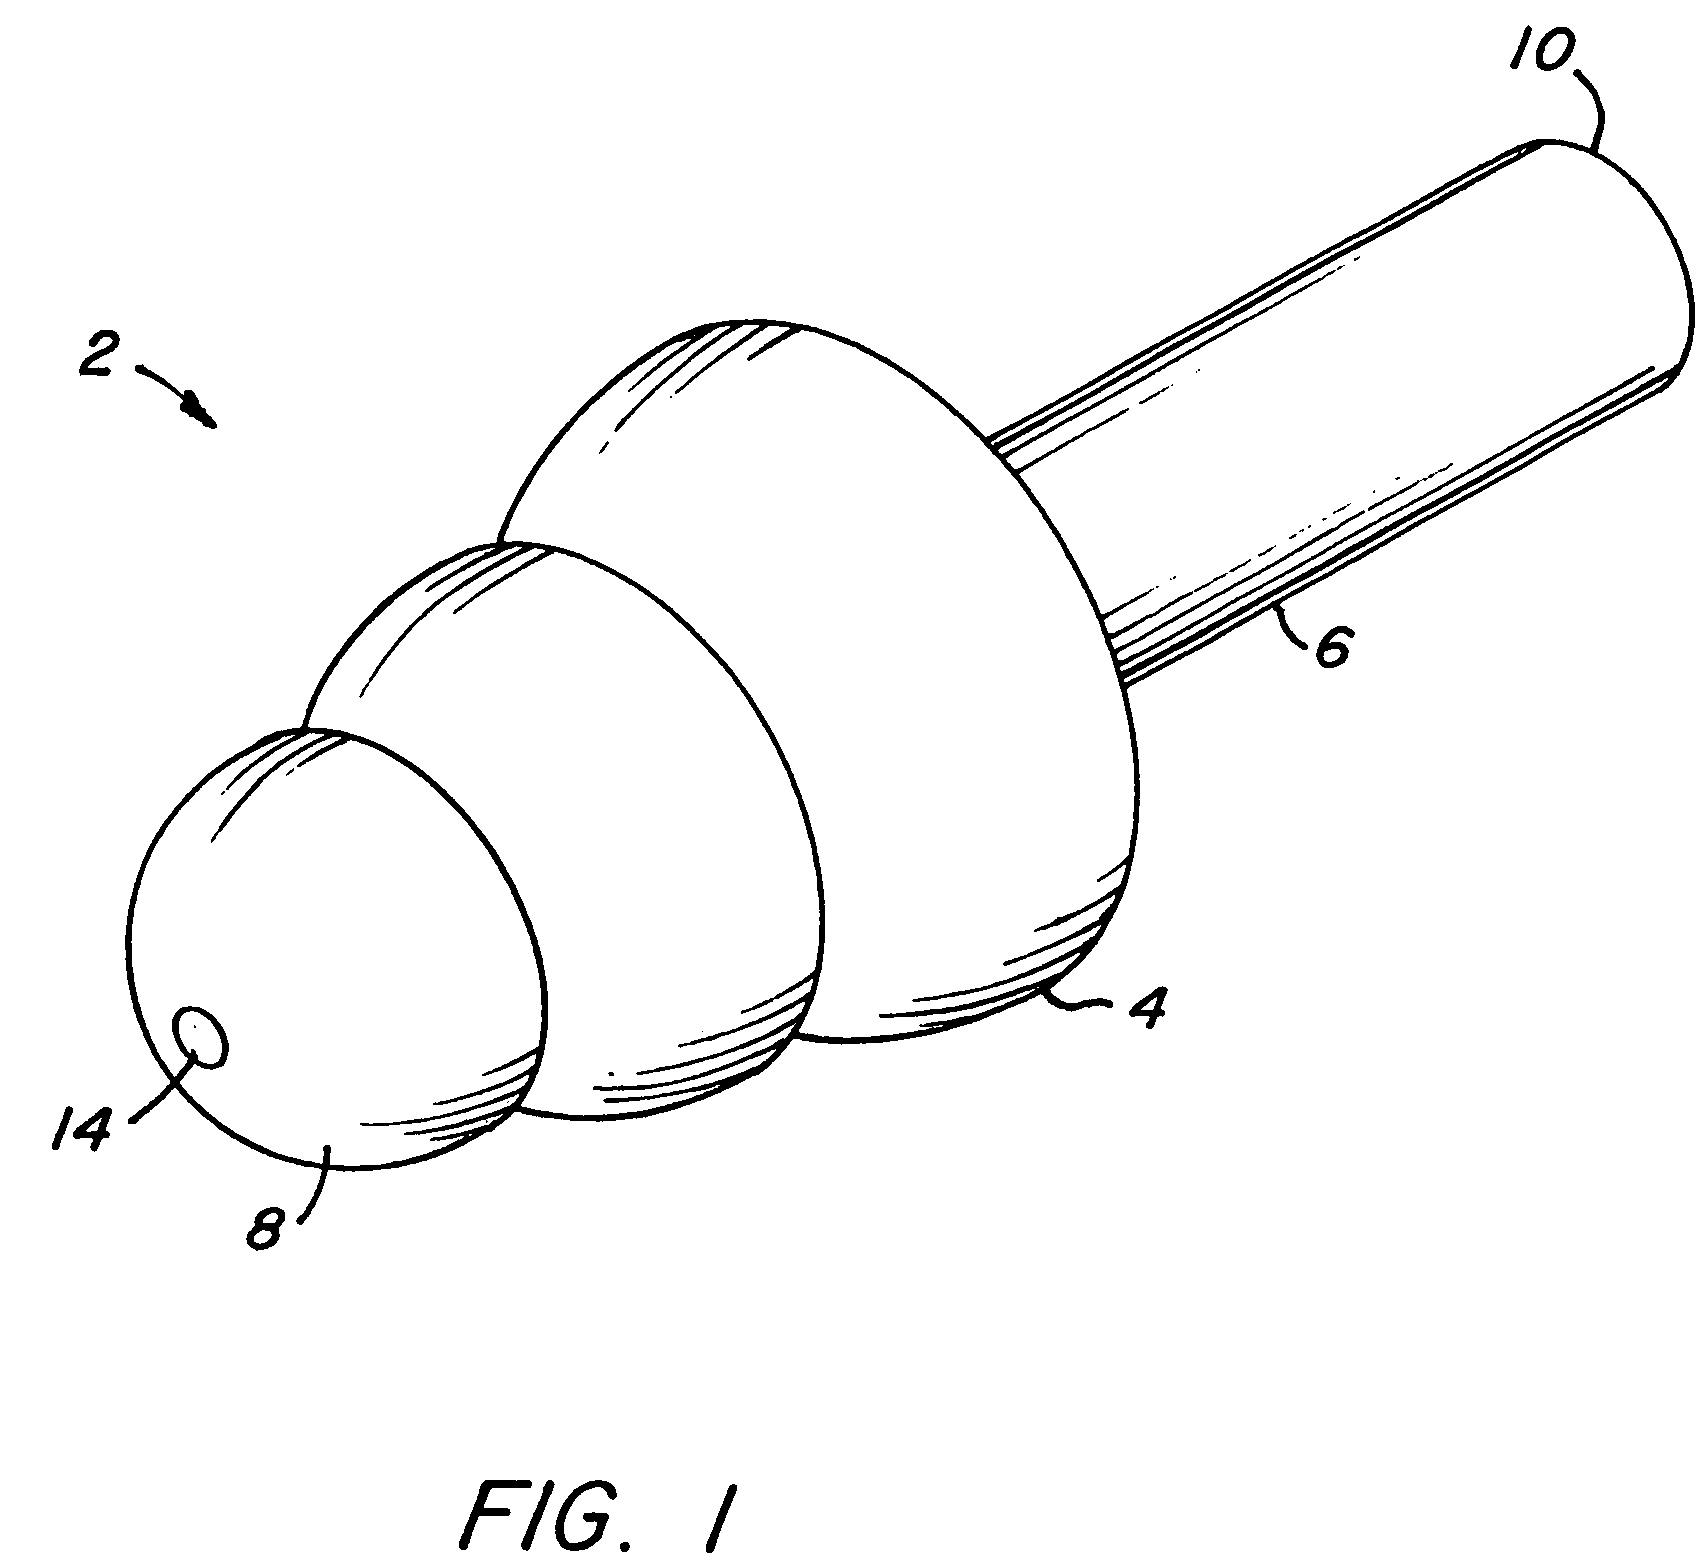 Low sound attenuating hearing protection device